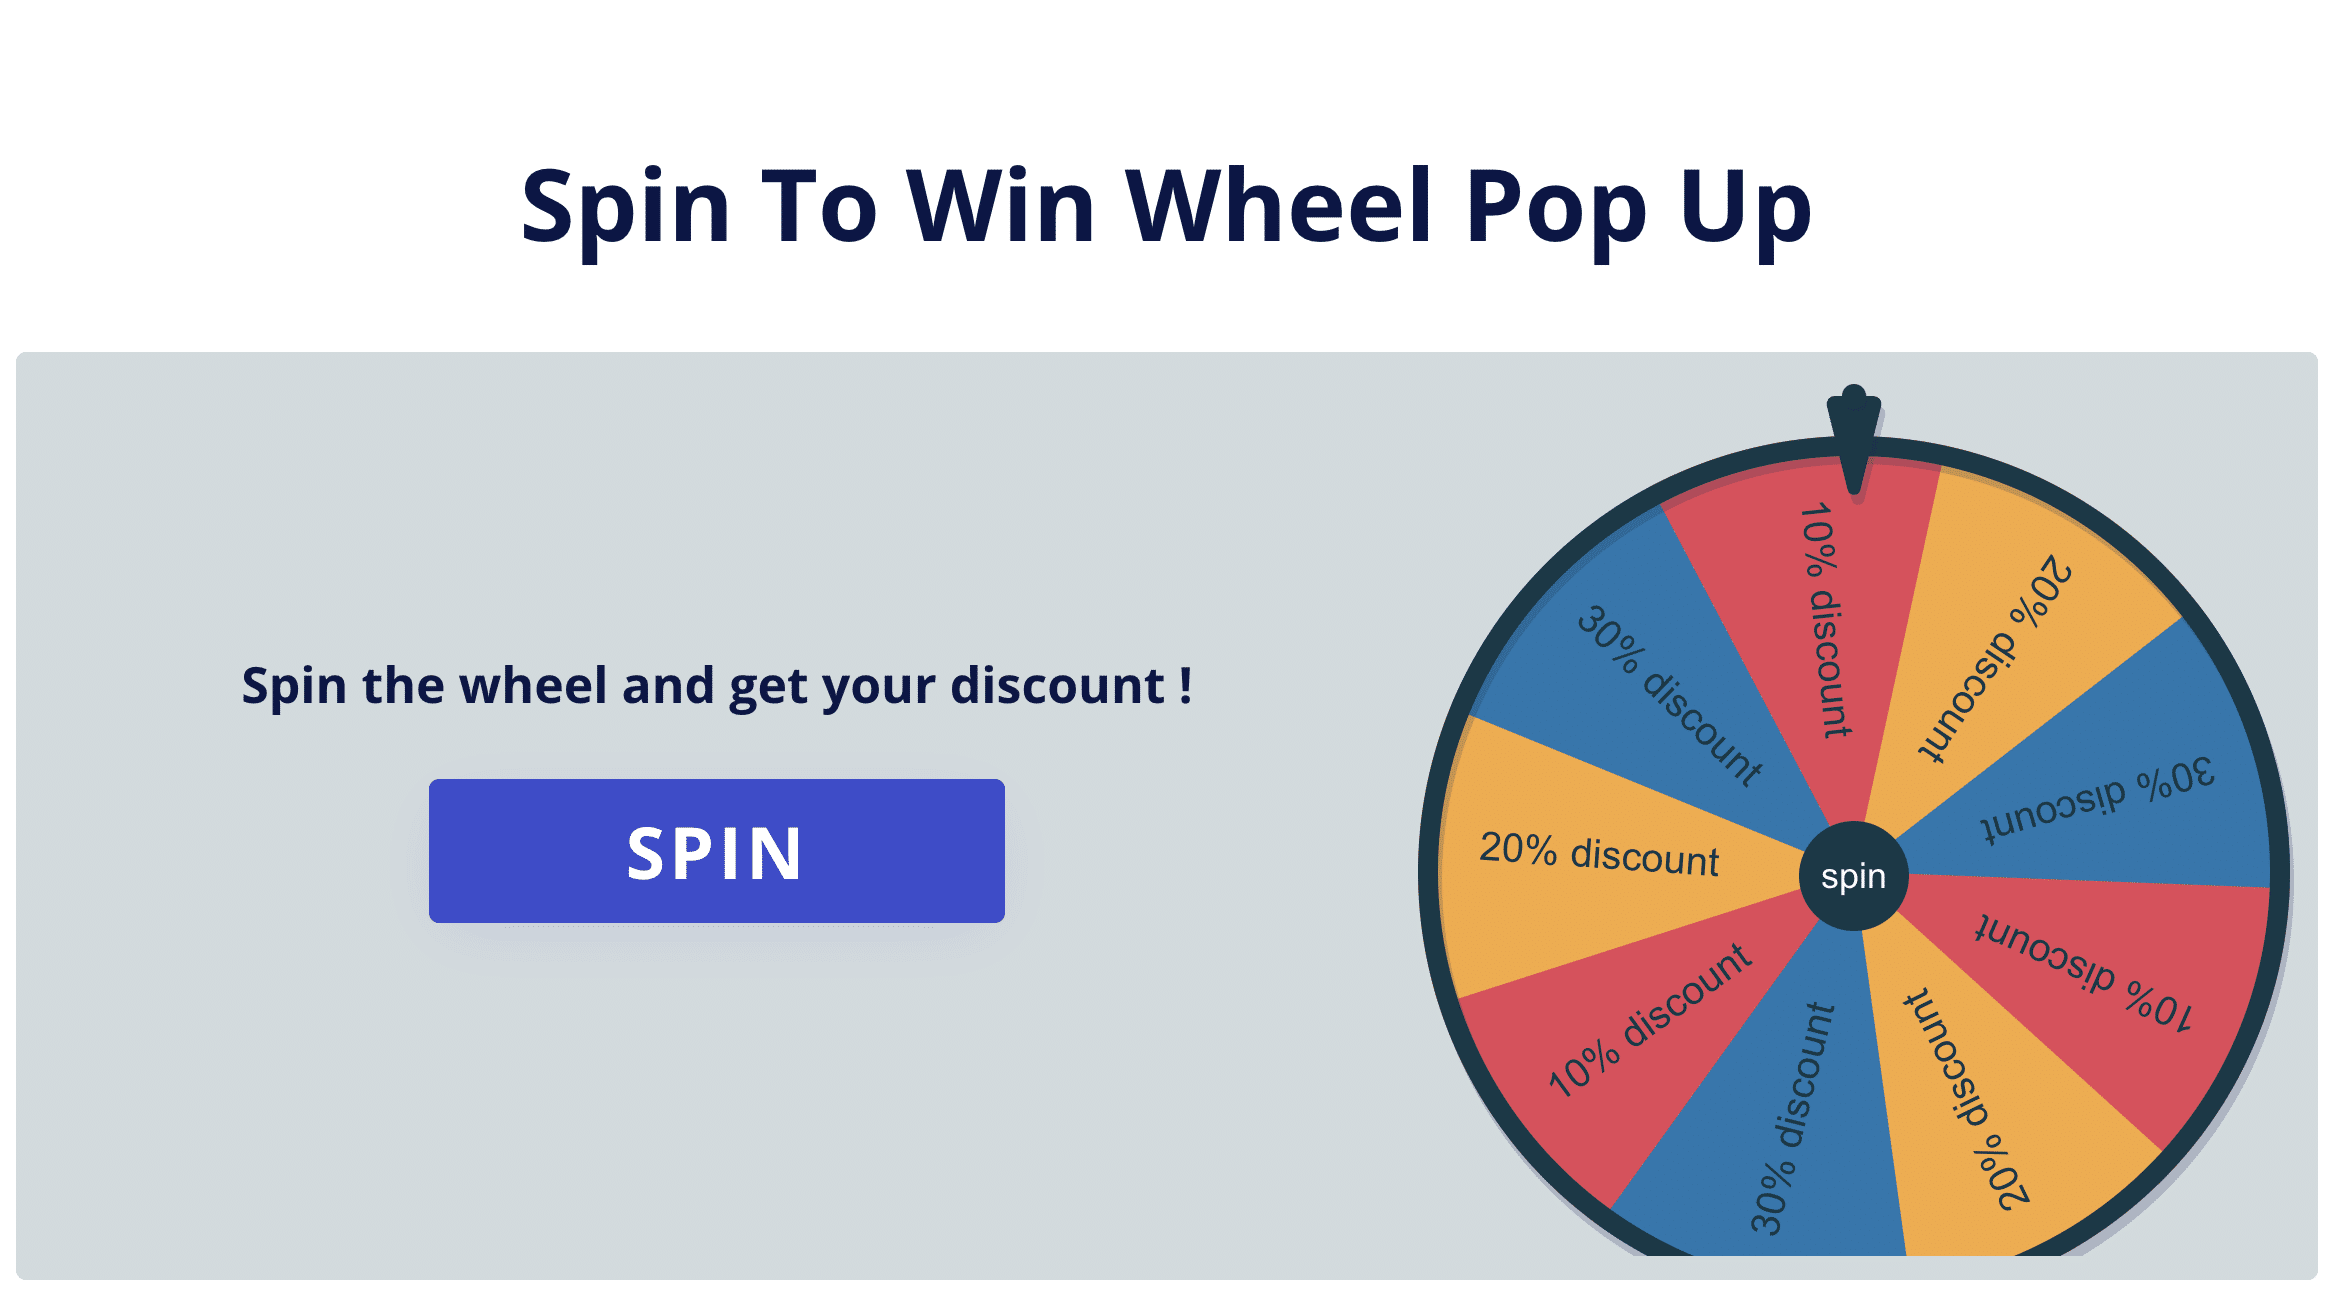 Spin to Win Wheel